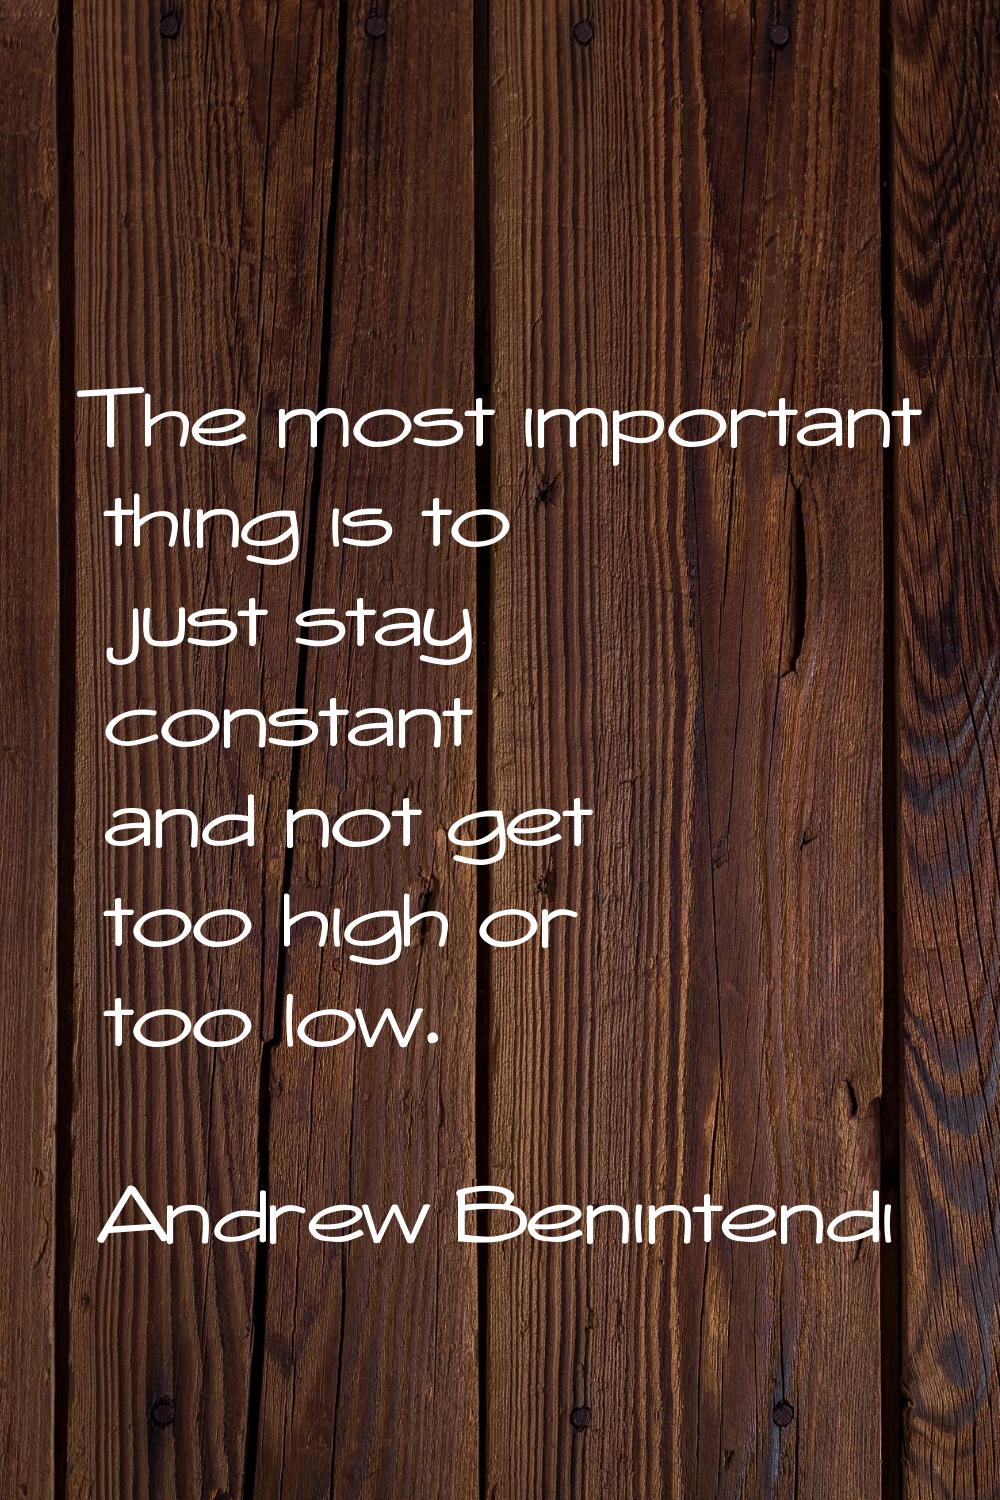 The most important thing is to just stay constant and not get too high or too low.